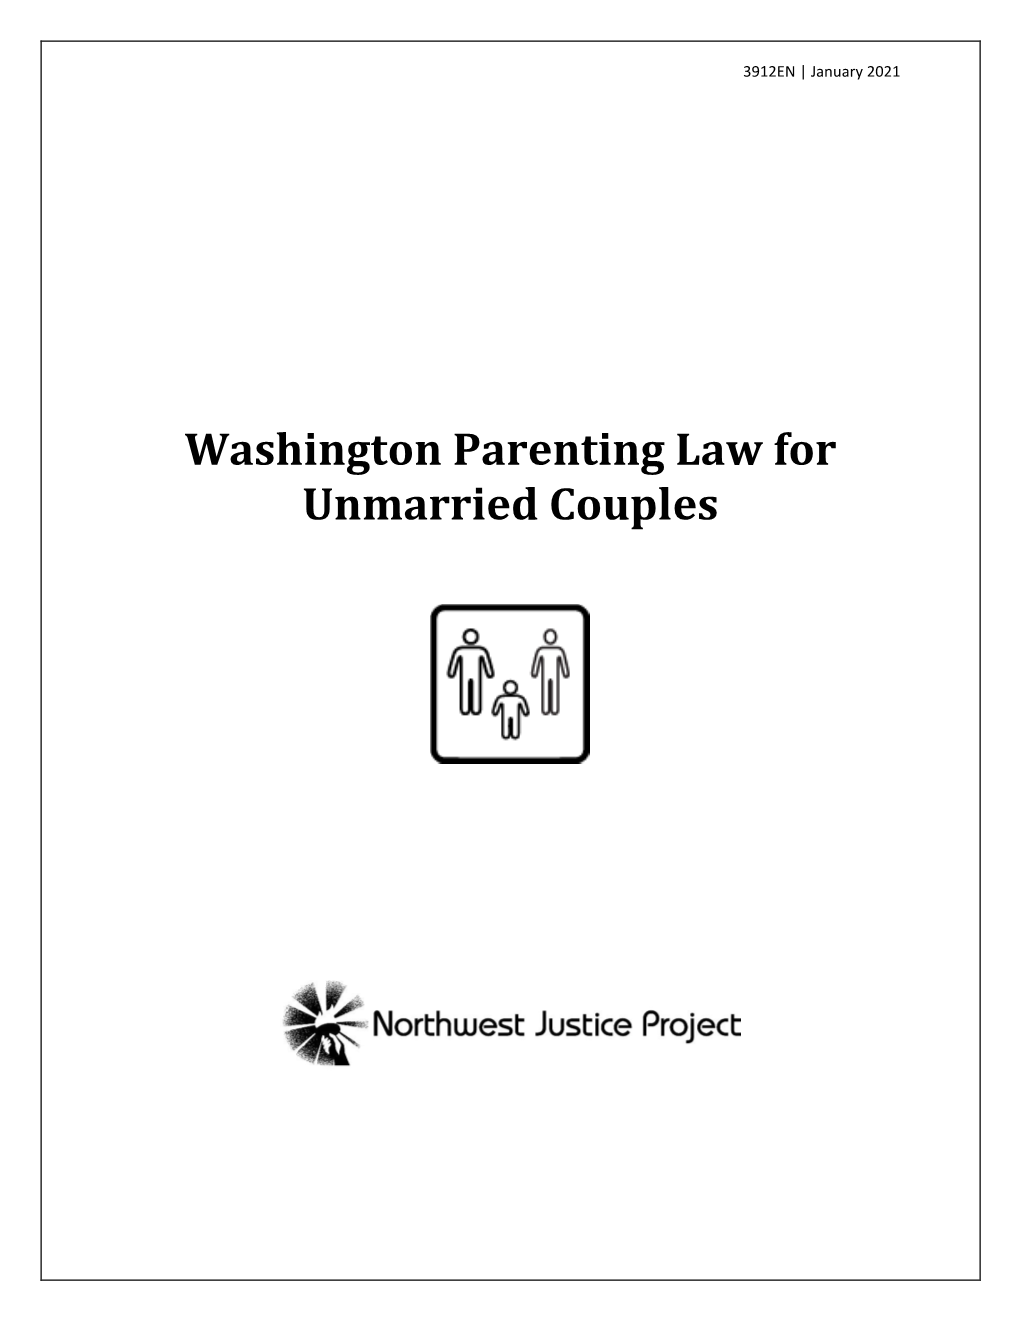 Washington Parenting Law for Unmarried Couples